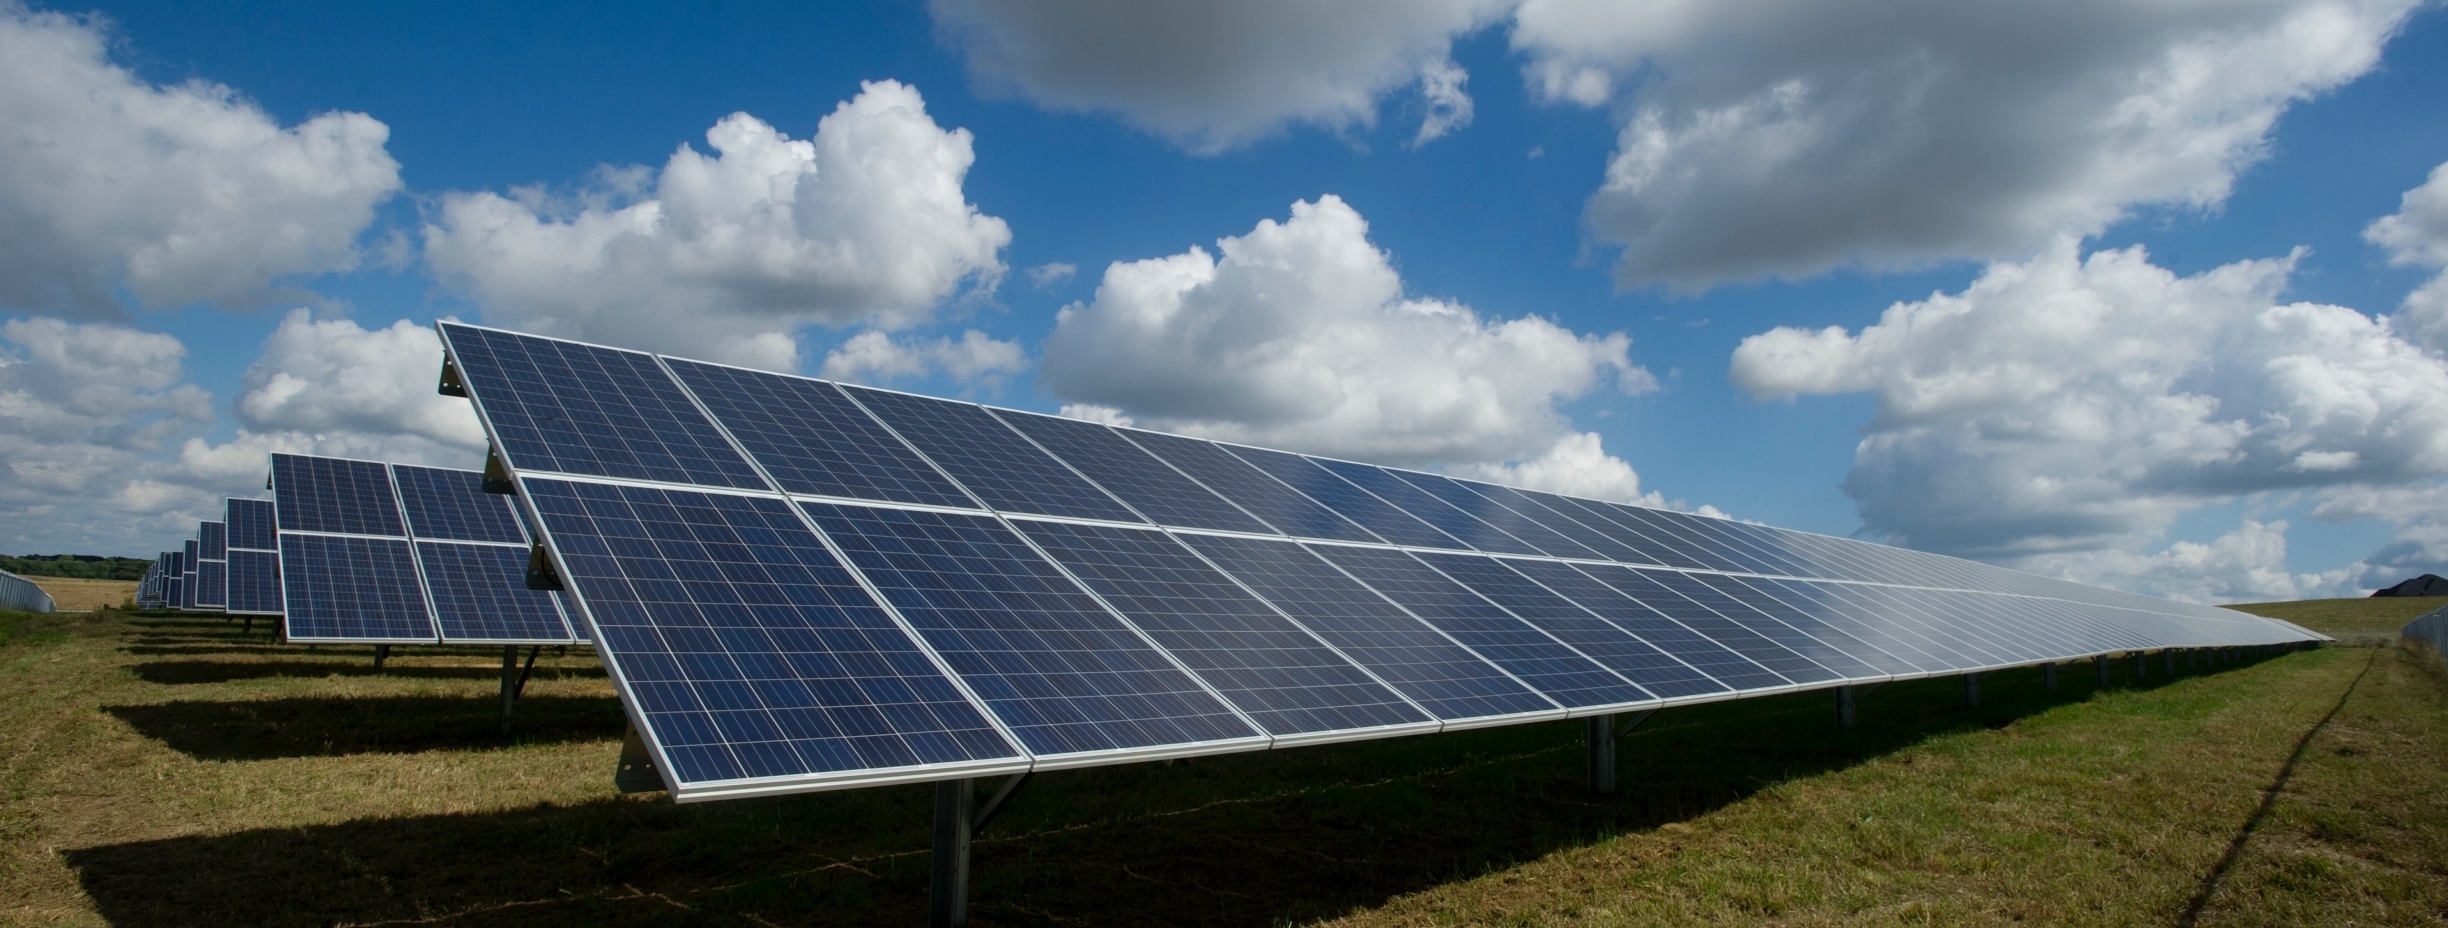 Interconnection of “Aetos” Photovoltaic Stations in Aitoloakarnania